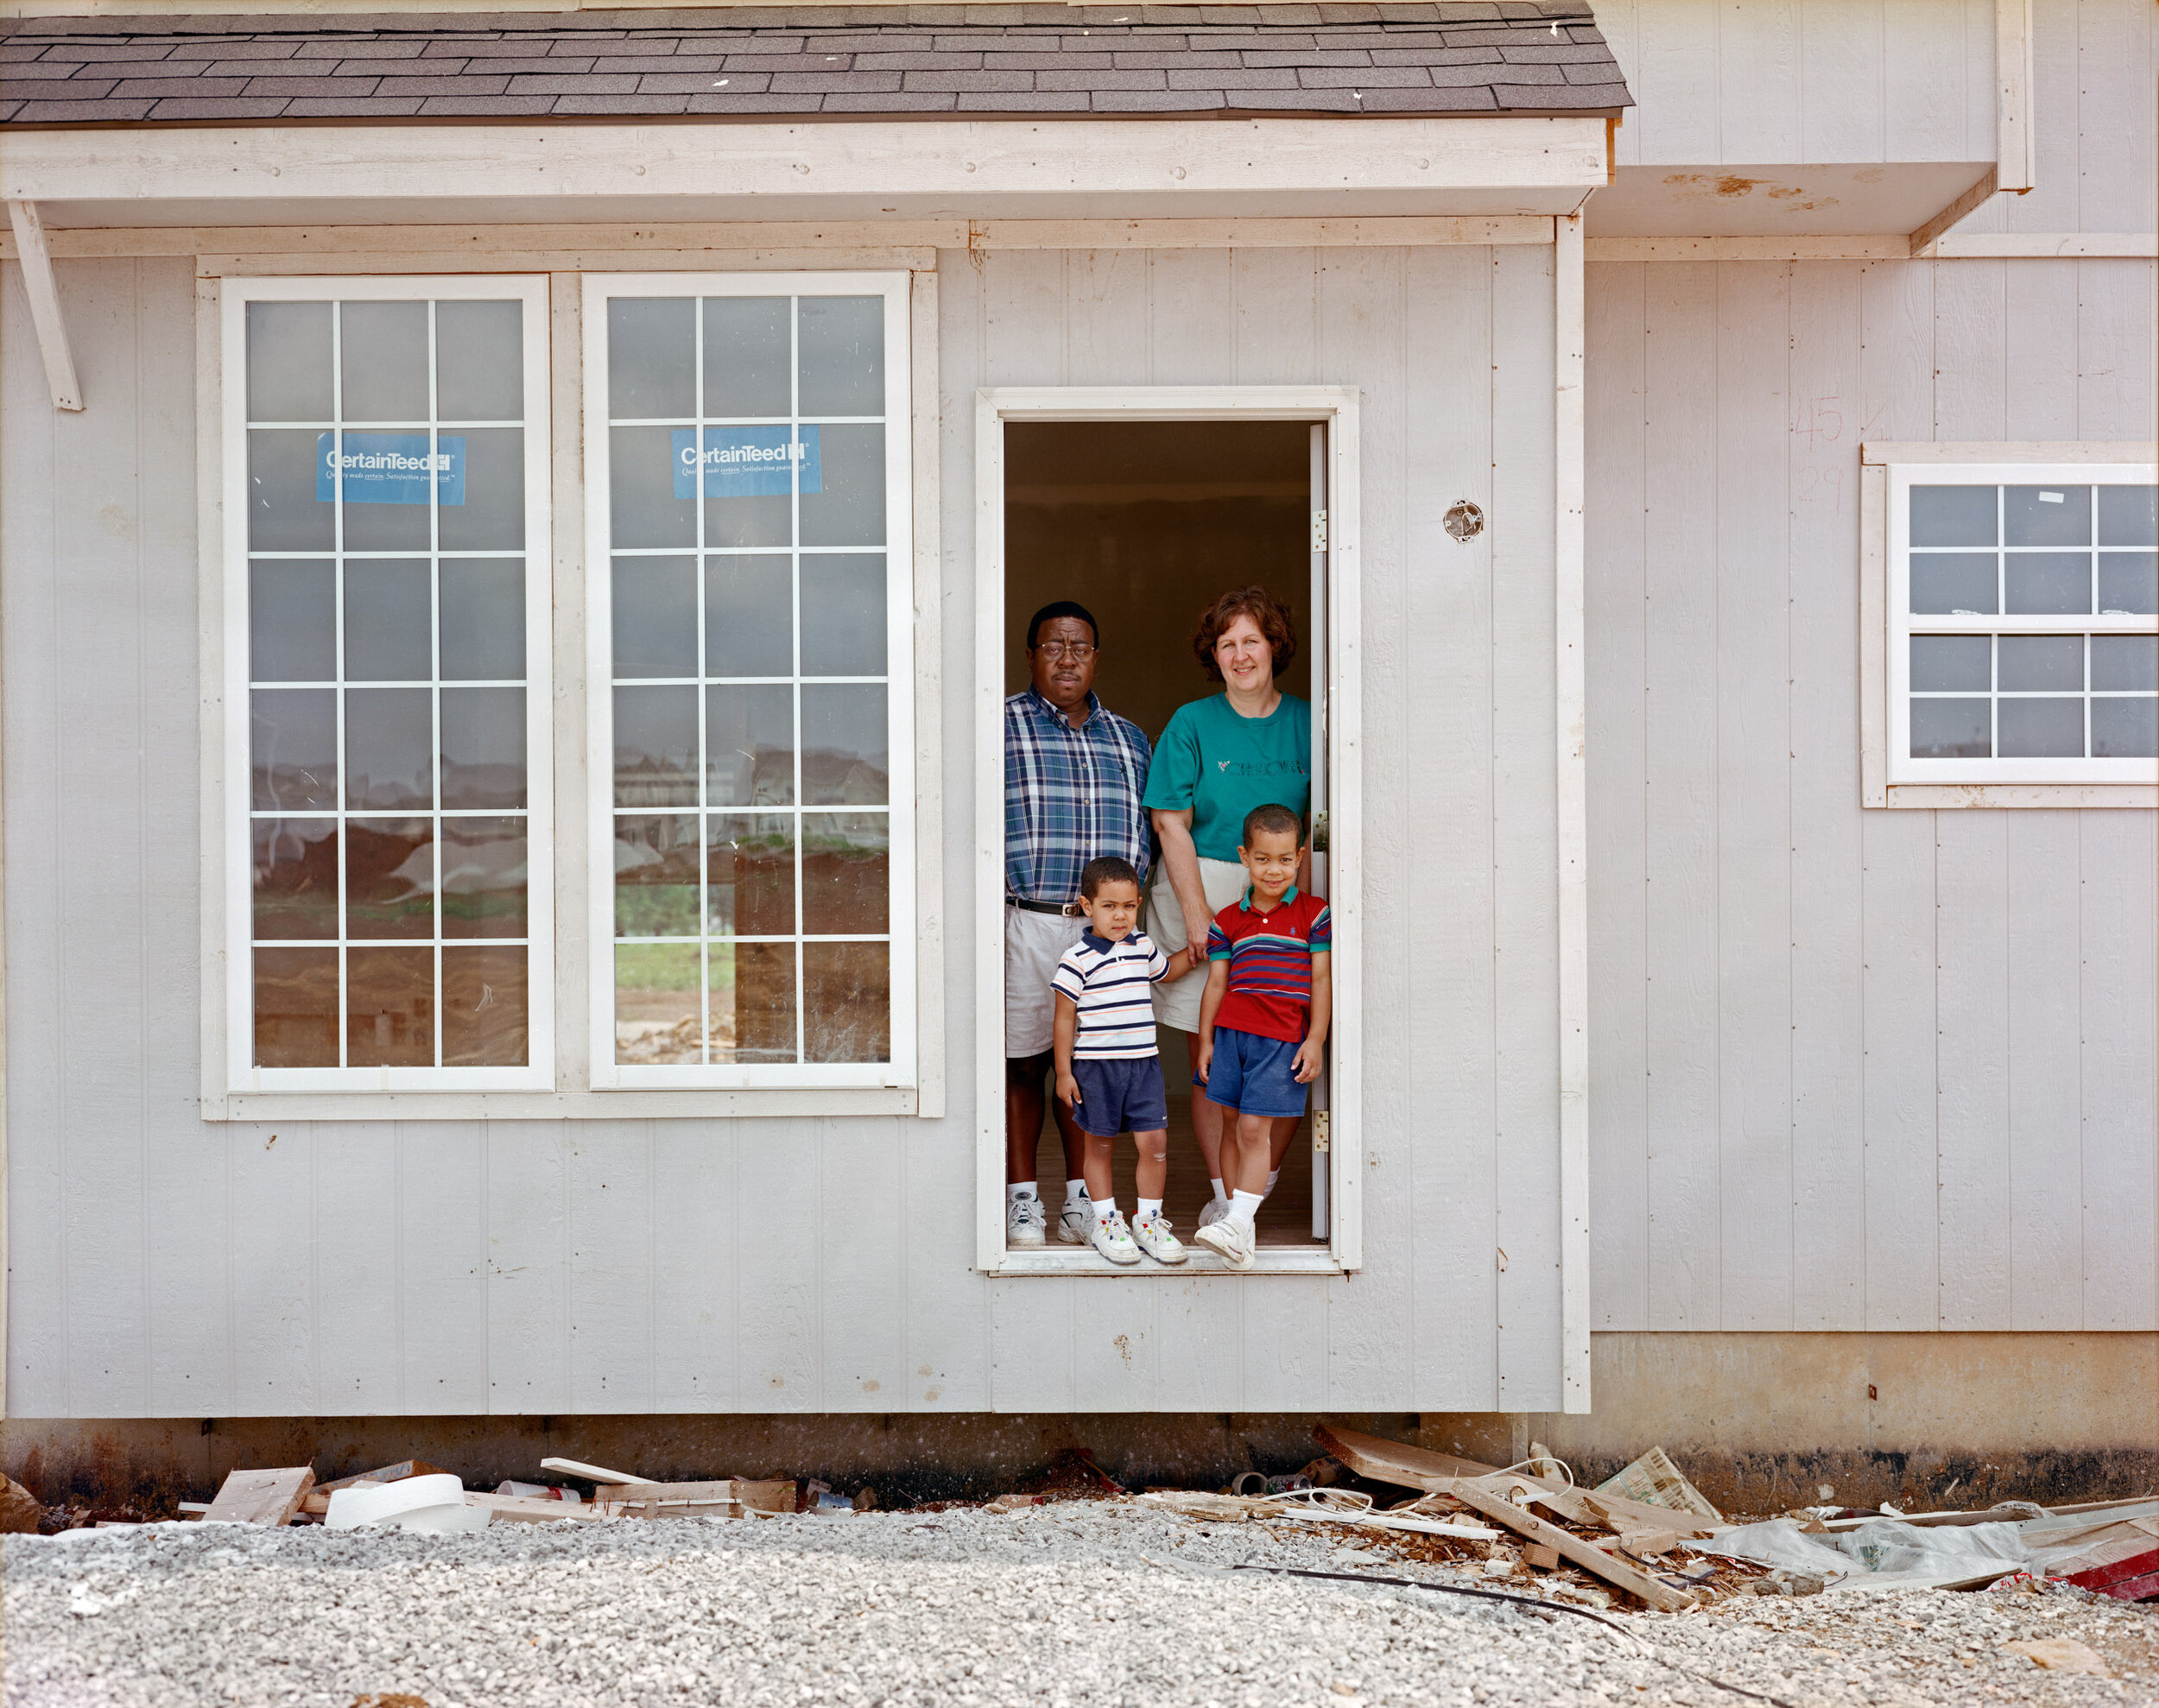 A Family in the Doorway of Their Home during Construction, Lenexa, Kansas, June 1999